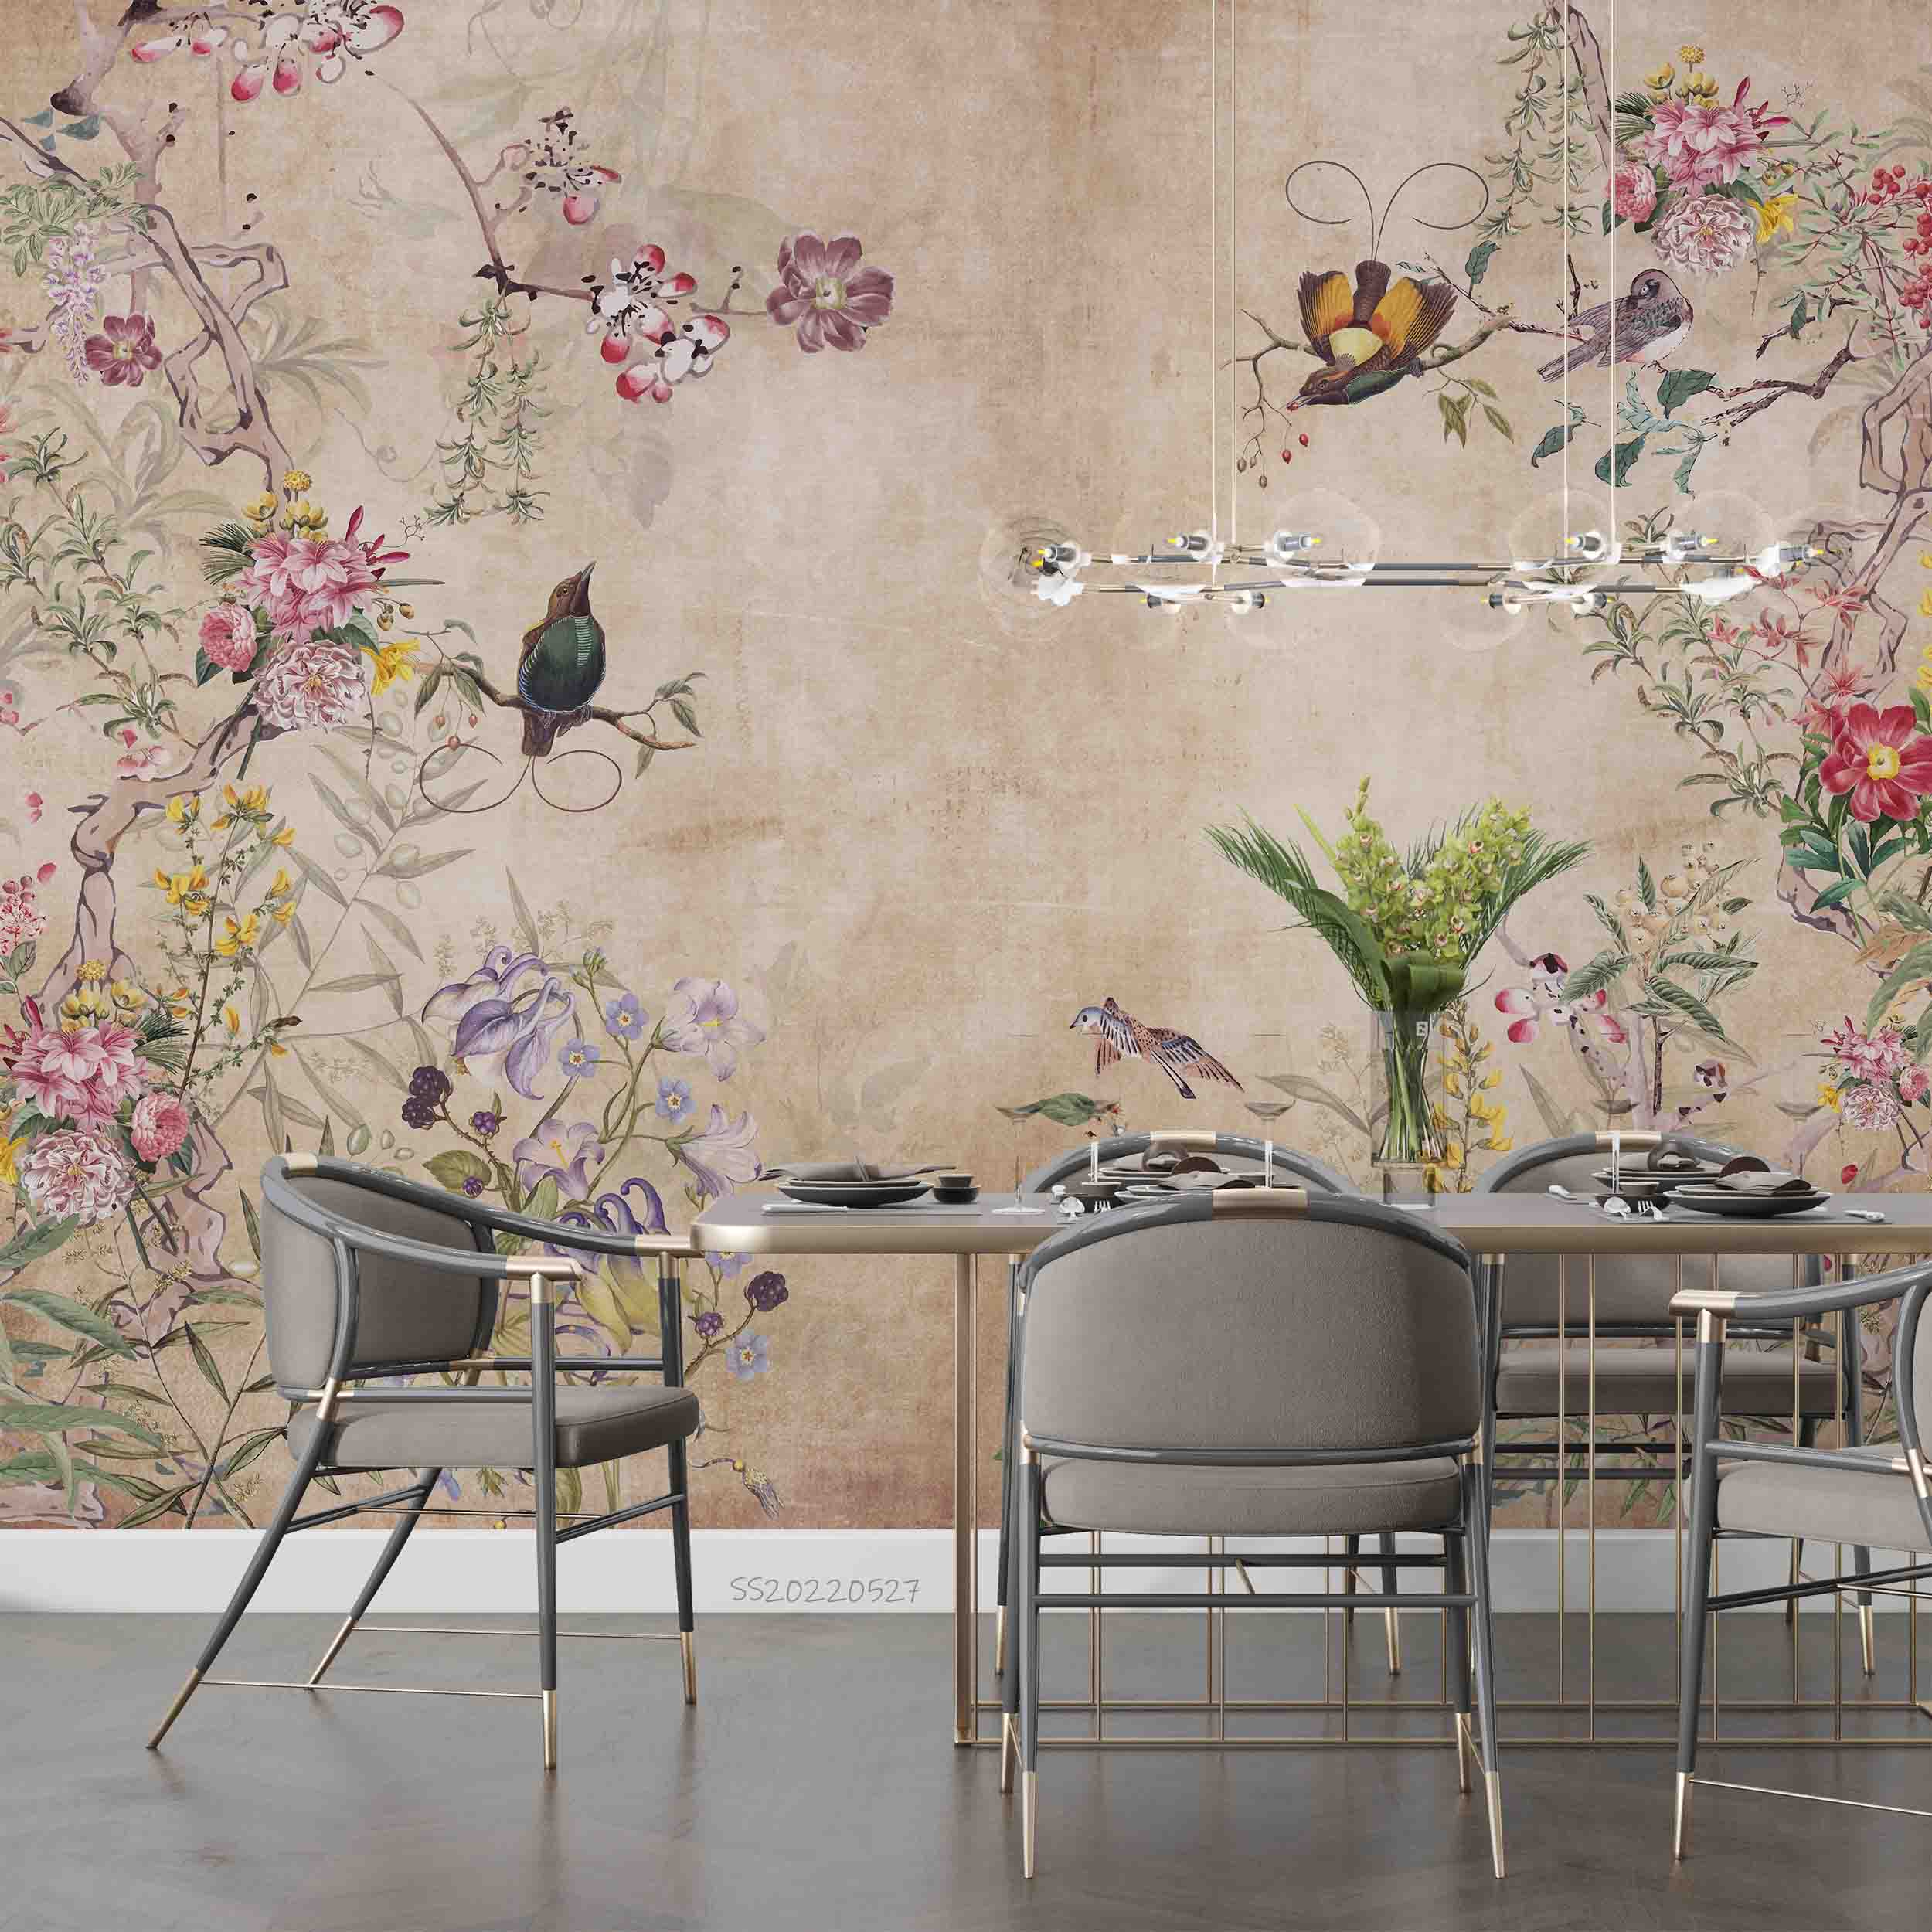 3D Vintage Branches Colorful Floral Wall Mural Wallpaper GD 4138- Jess Art Decoration